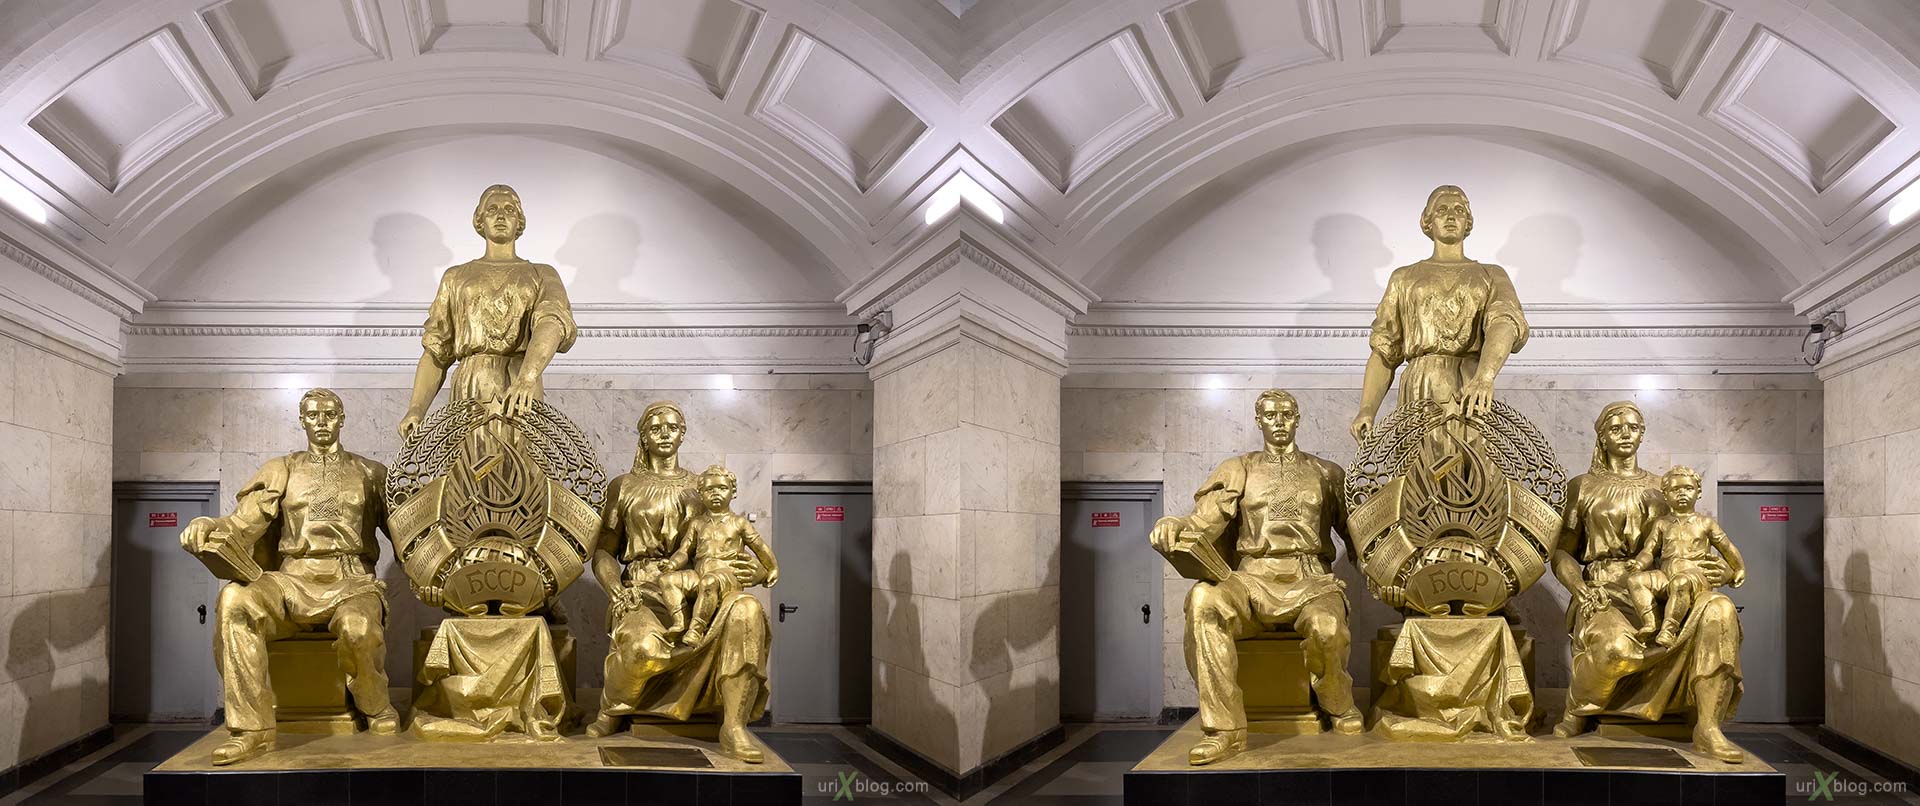 Soviet Belorussia, Belorusskaia, monument, statue, worker, Moscow, Russia, metro, subway, gold, 3D, stereo pair, cross-eyed, crossview, cross view stereo pair, stereoscopic